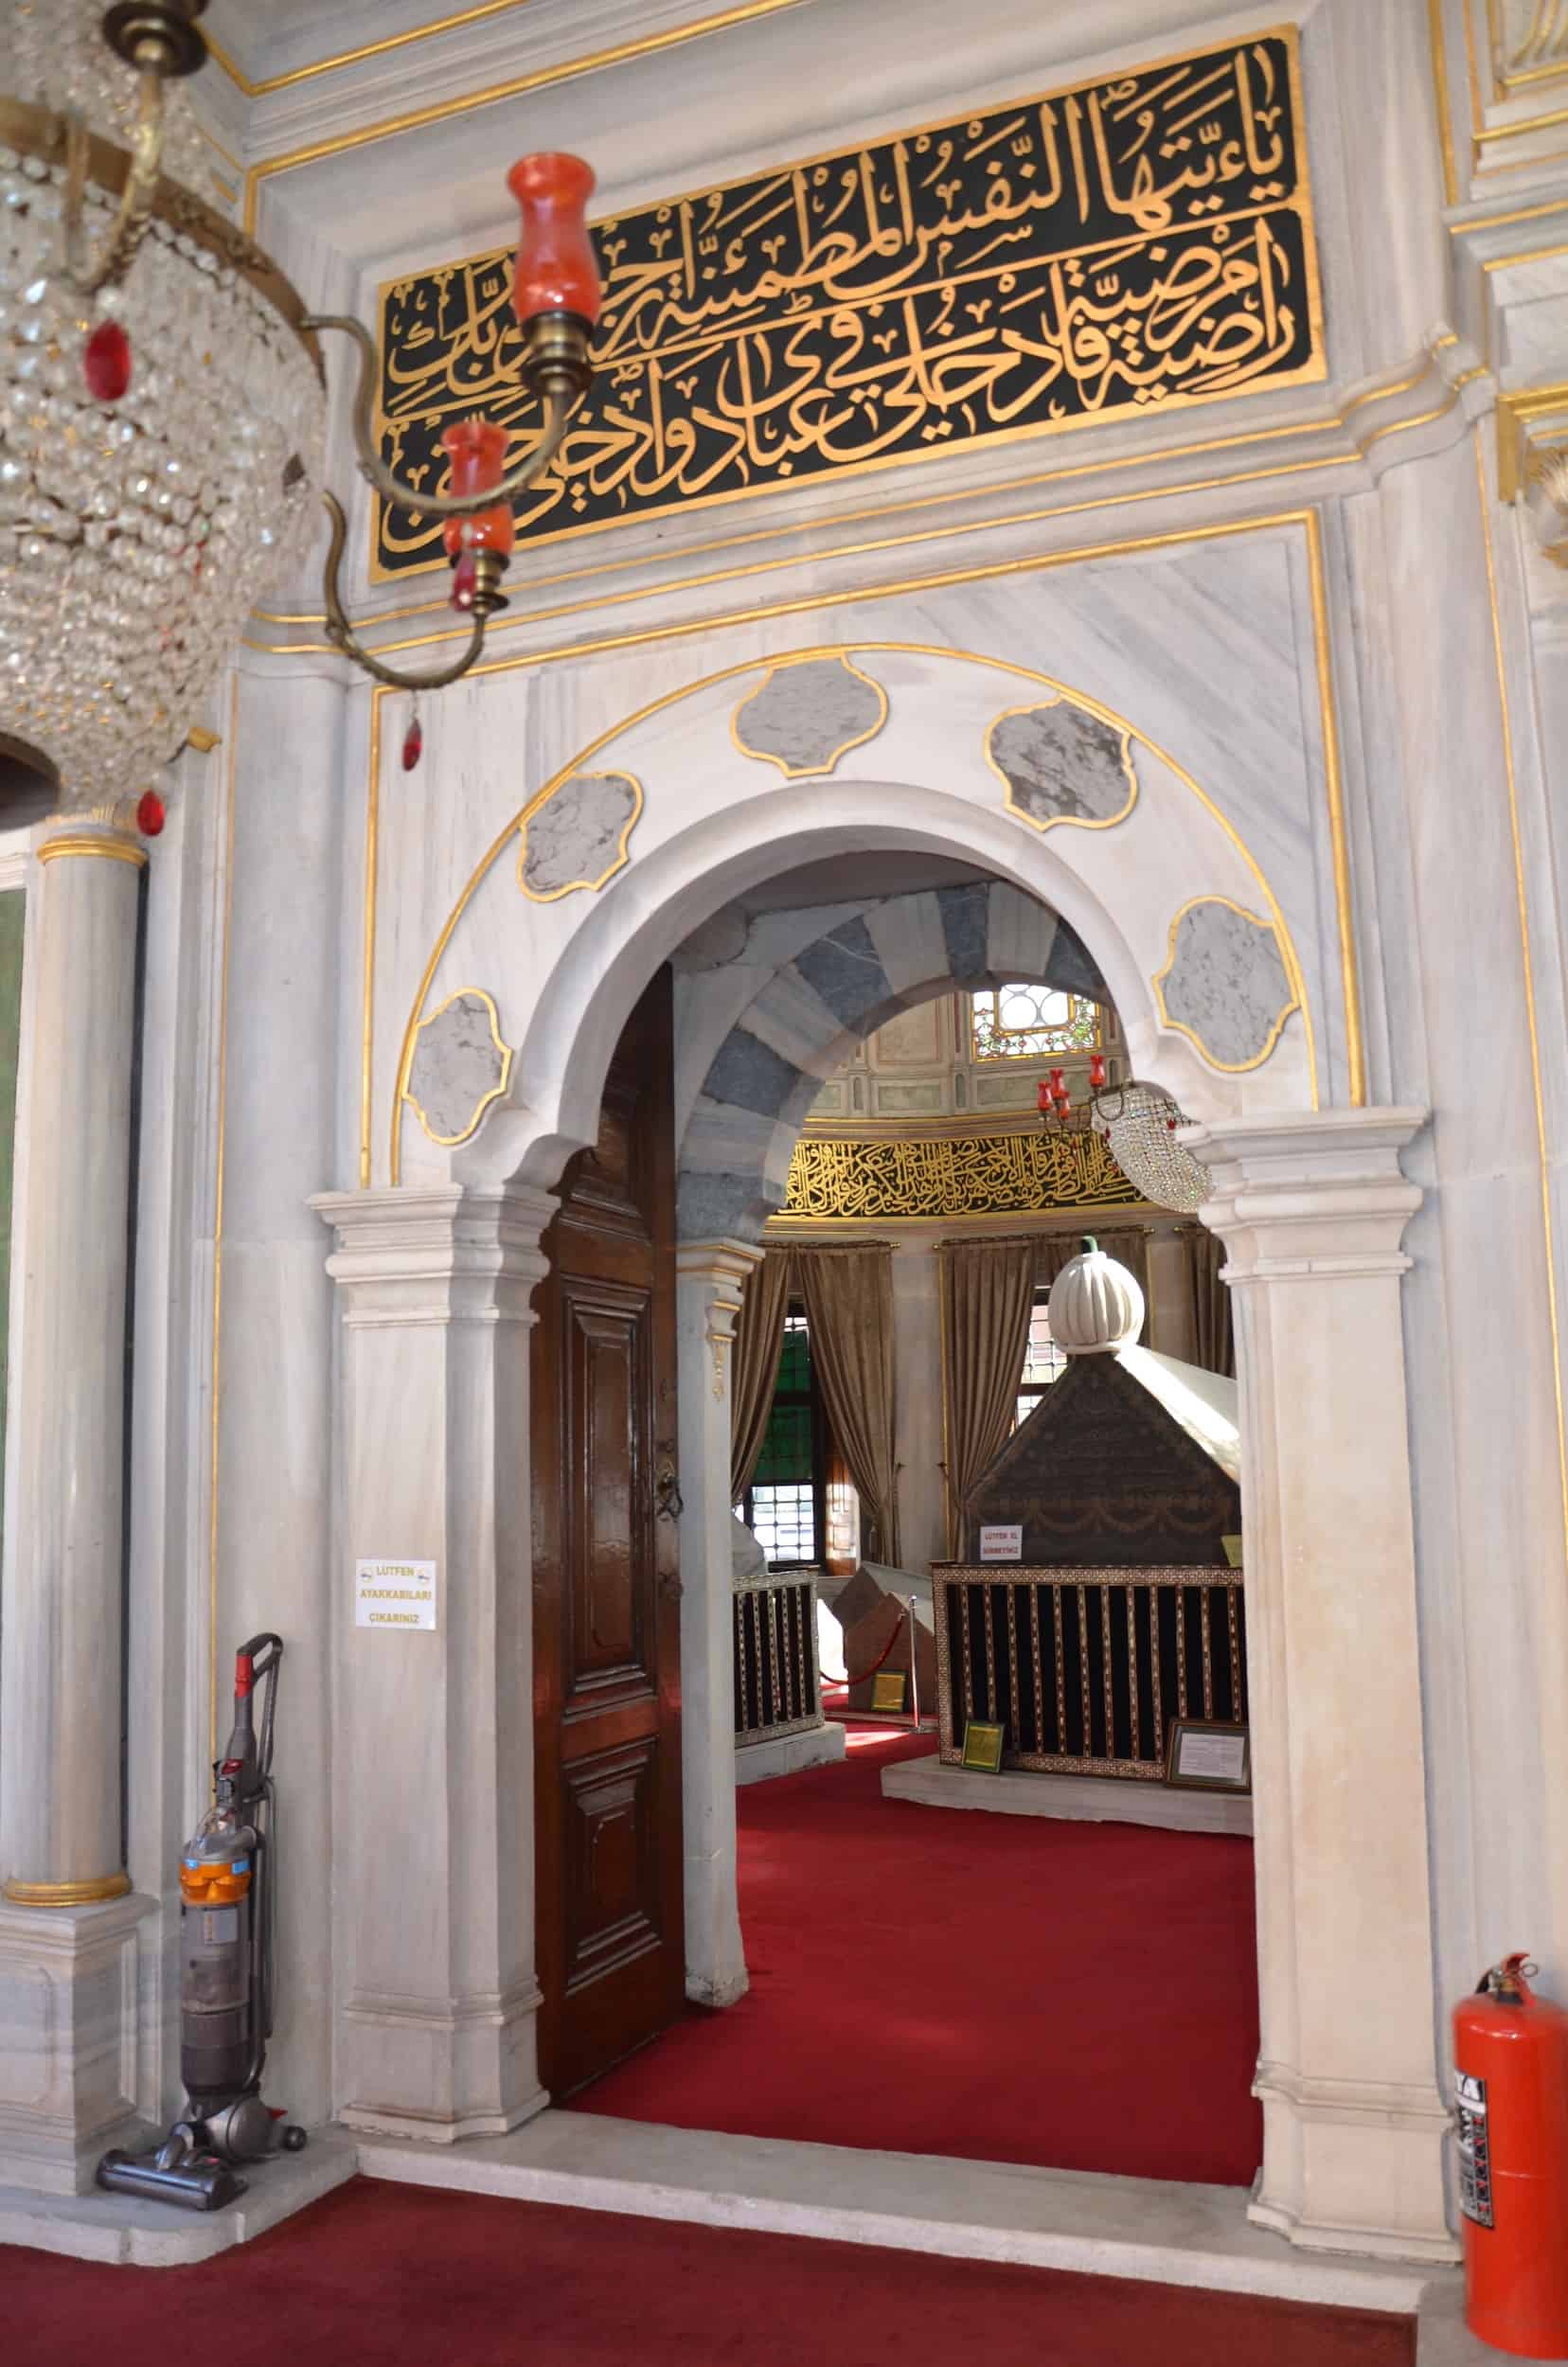 Entrance to the burial chamber at the Tomb of Abdülhamid I